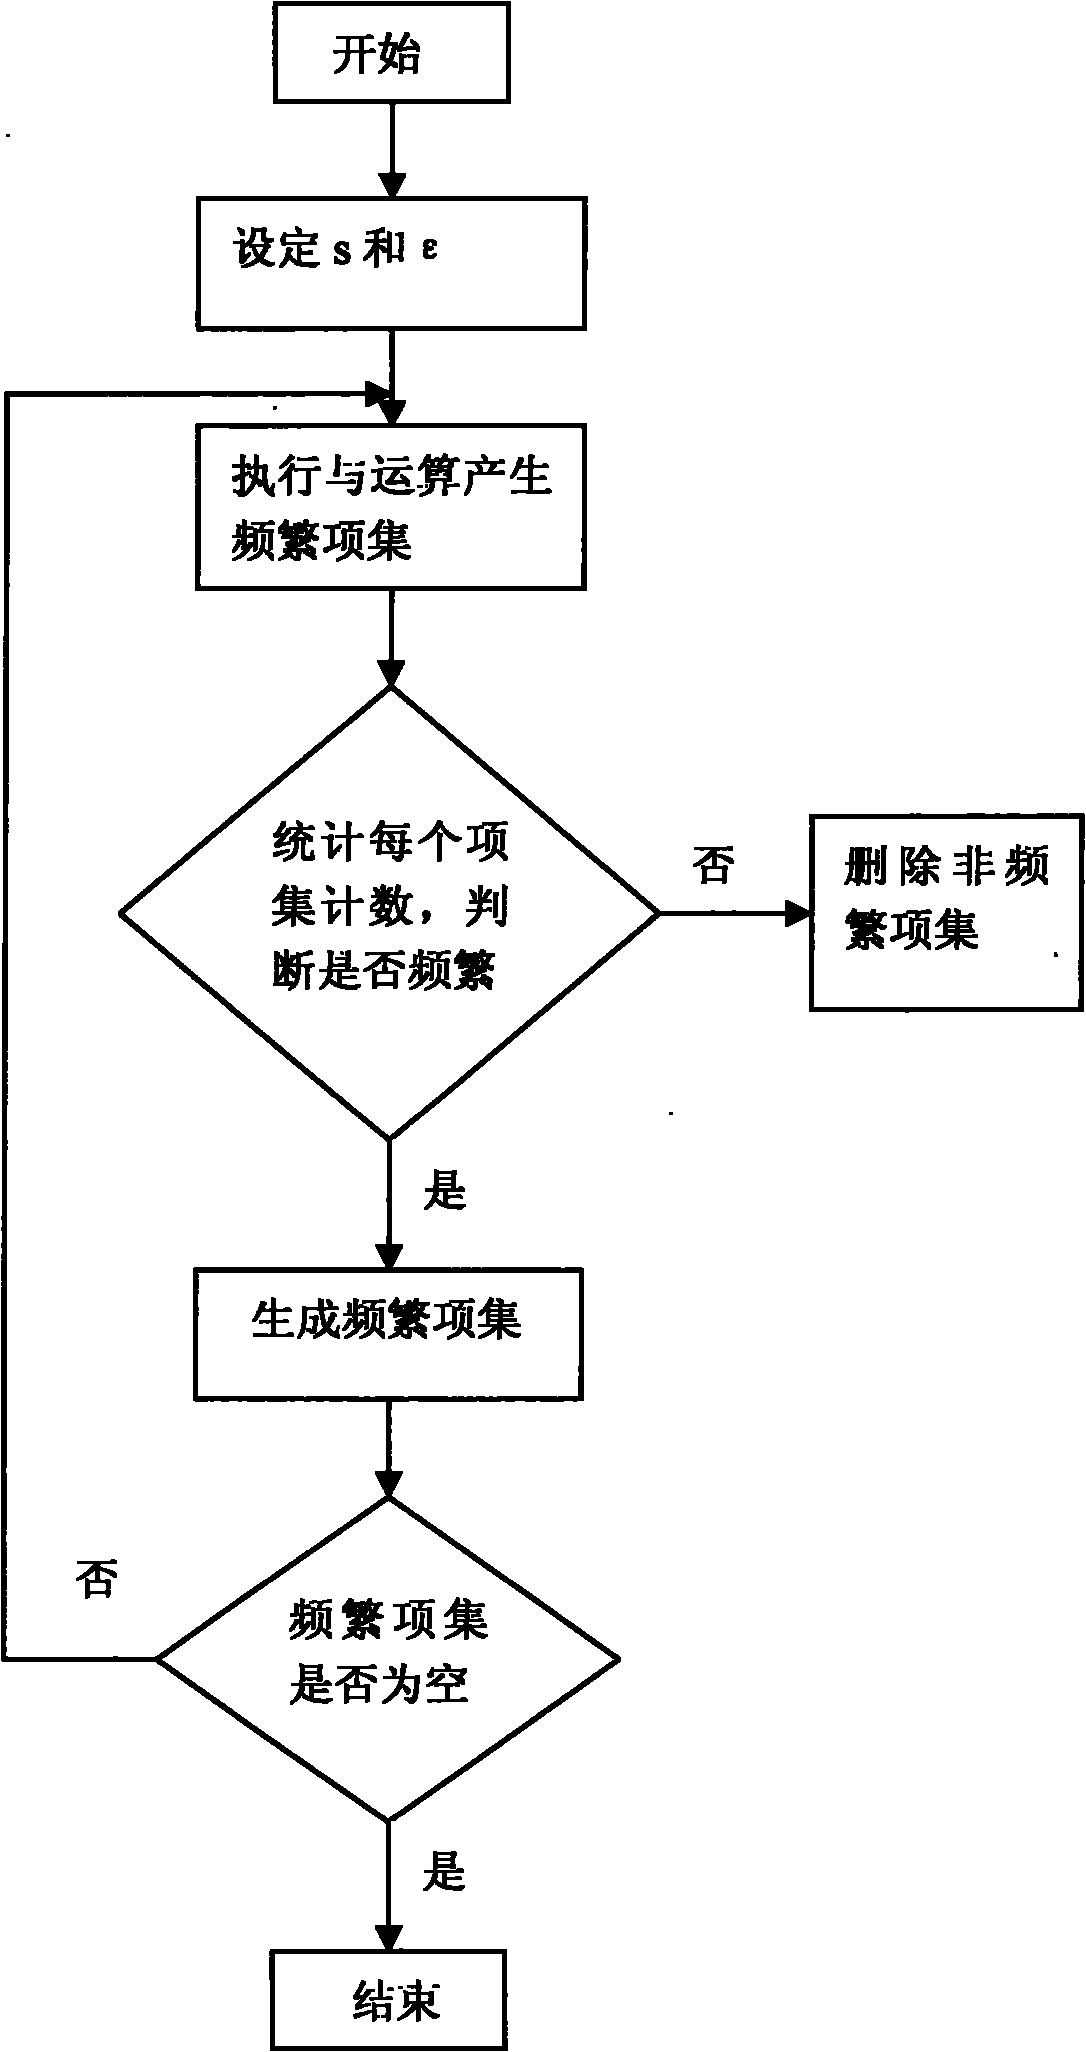 Stochastic distributed data stream frequent item set mining system and method thereof